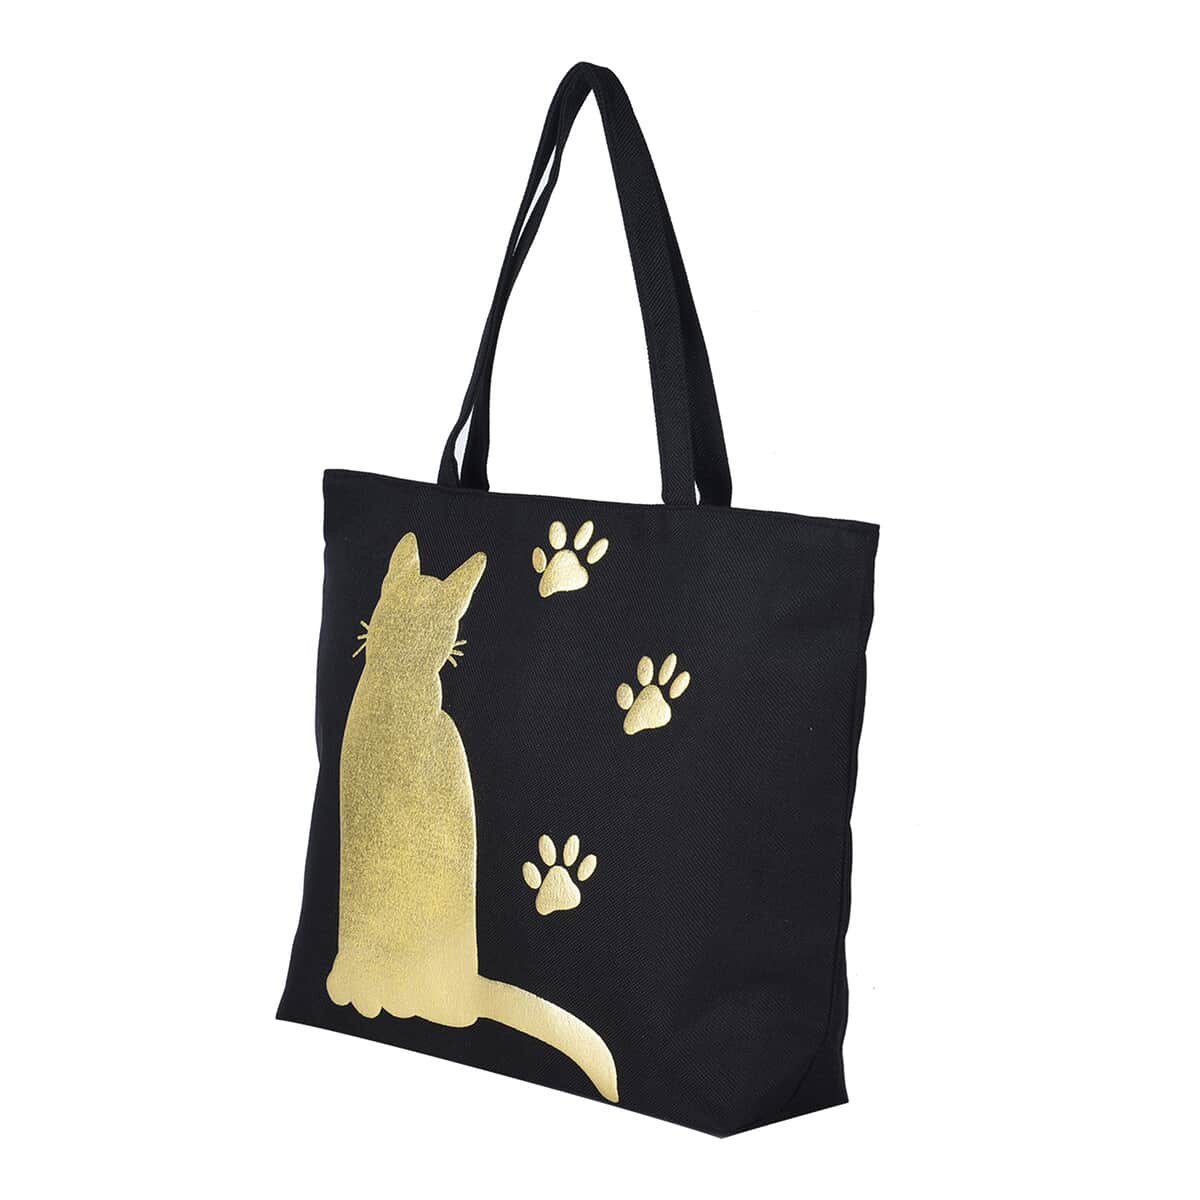 Blue with Cat Gold Blocking Pattern Linen Tote Bag (20.75"x5"x15") with 13" Handle Drop image number 4